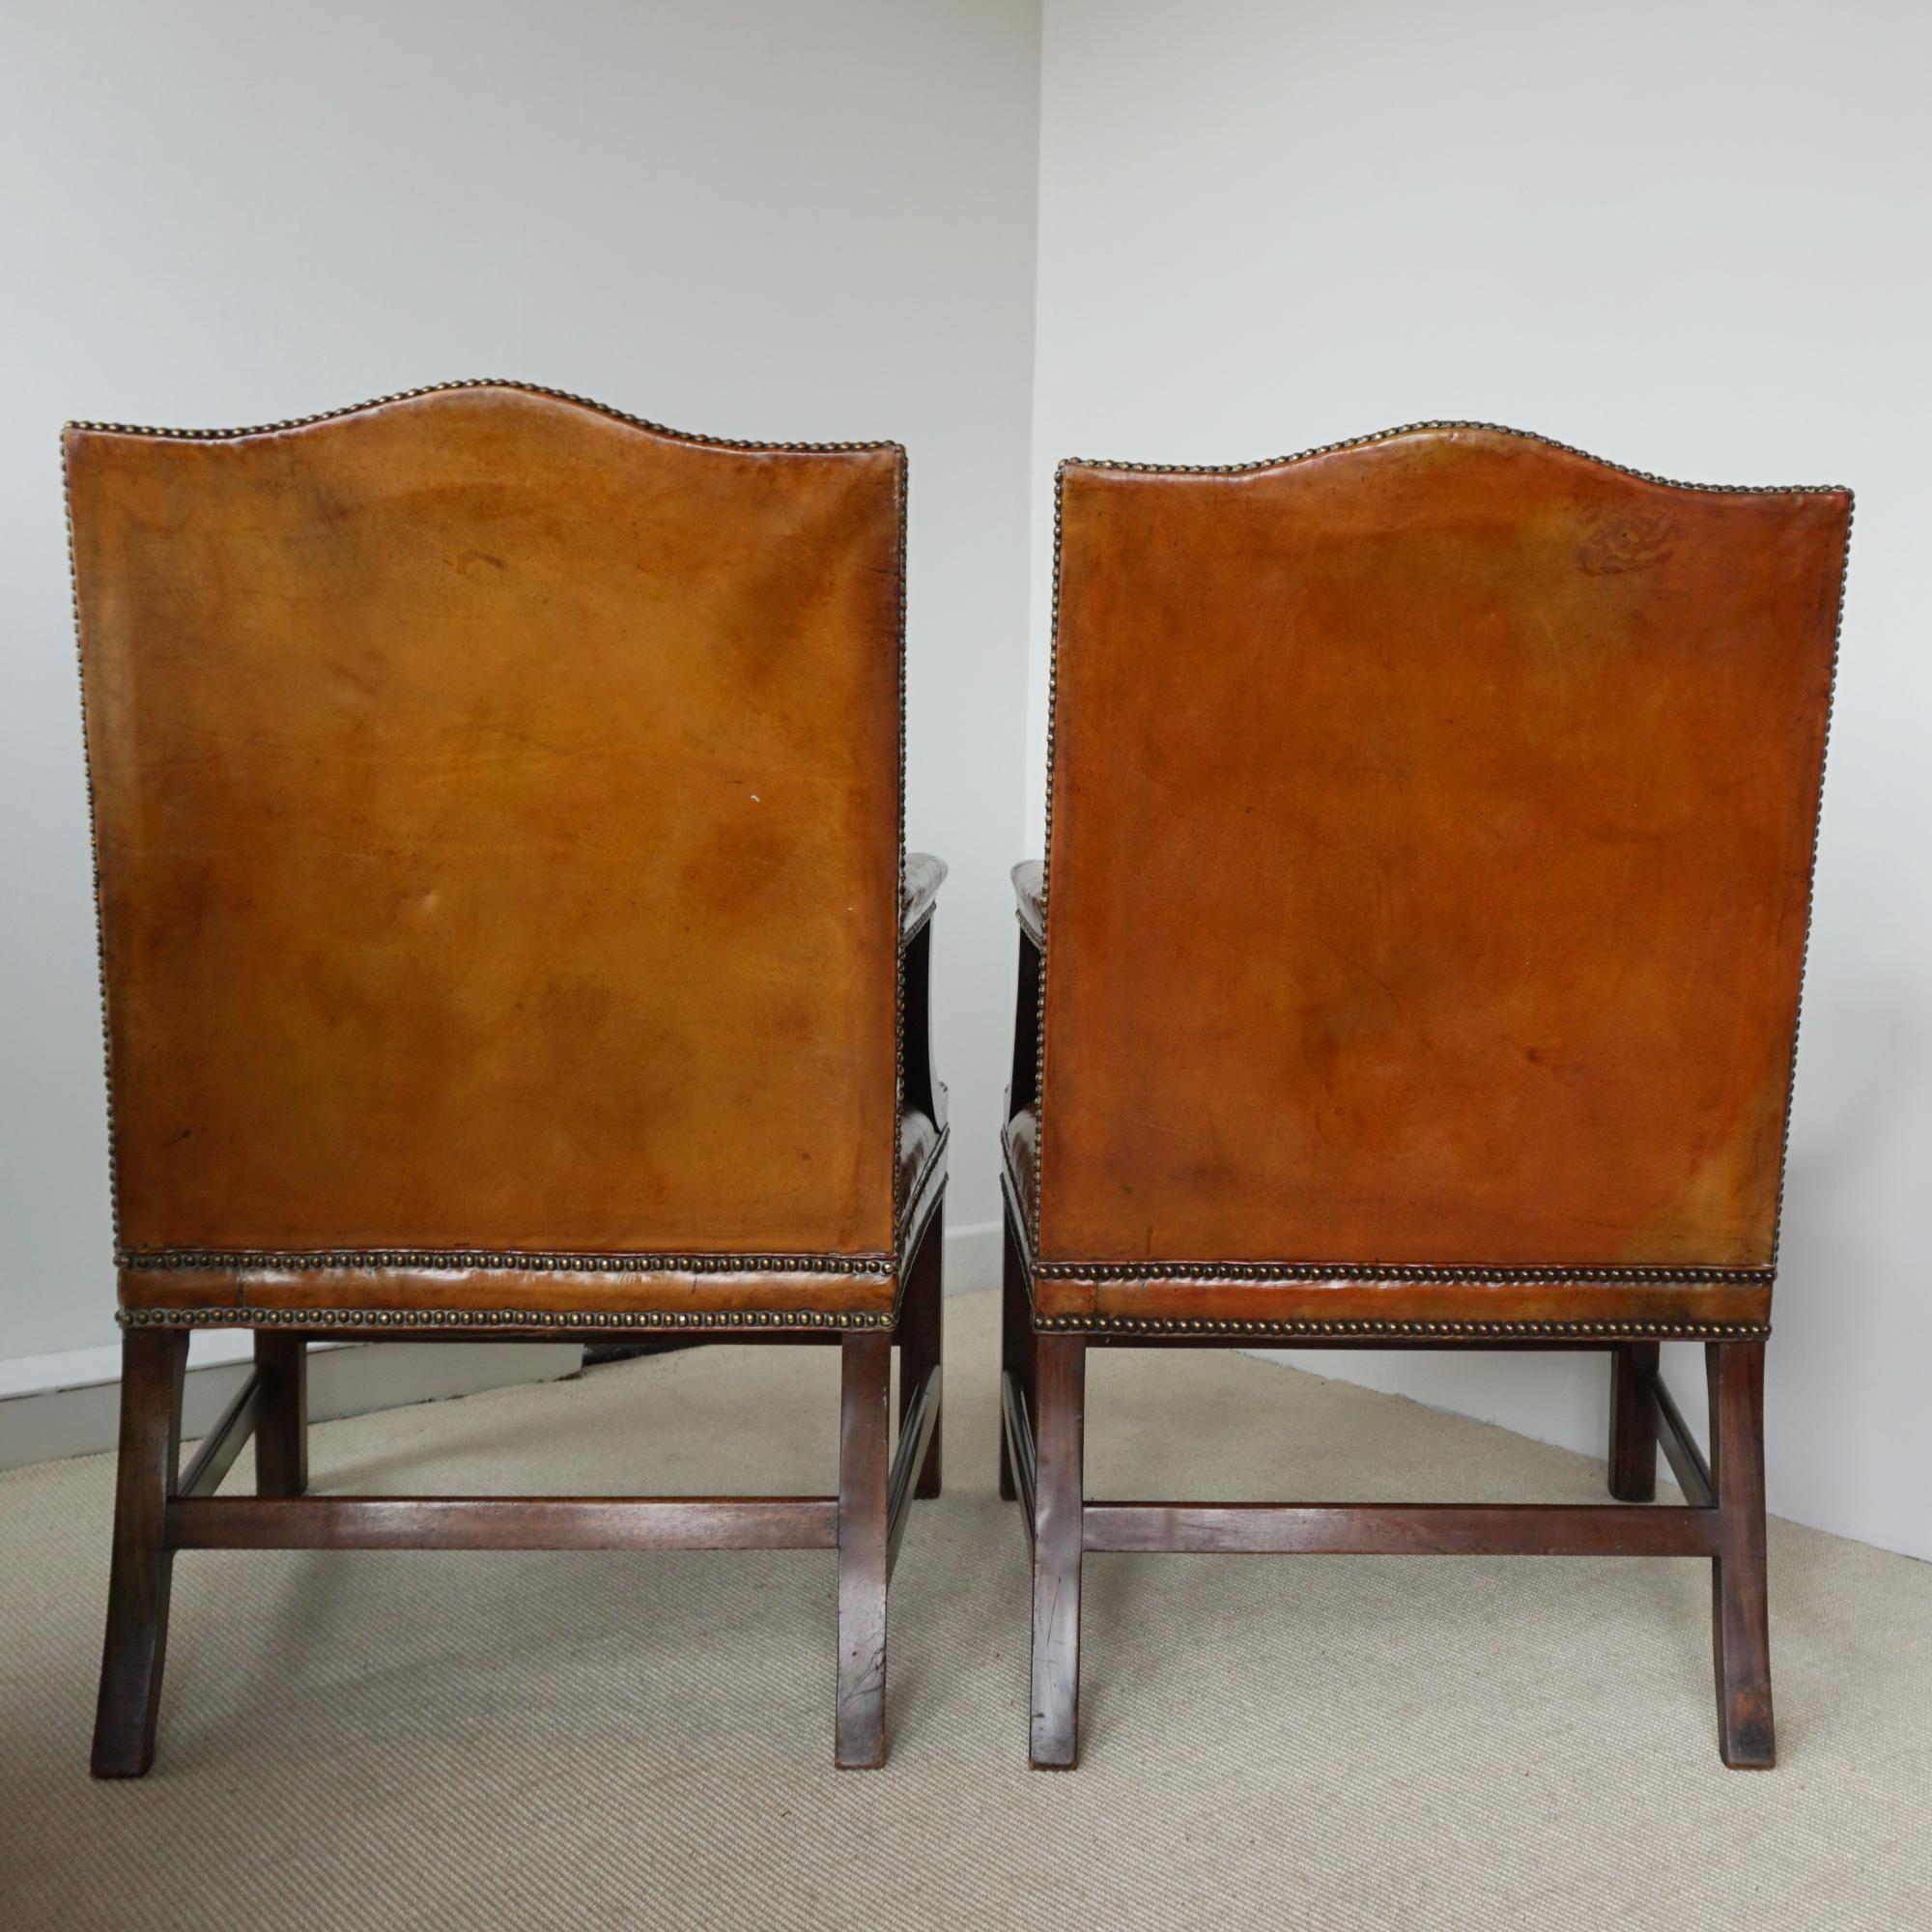 Pair of George III style Gainsborough library chairs. Vintage brown leather upholstery. with solid walnut arms and legs. 

